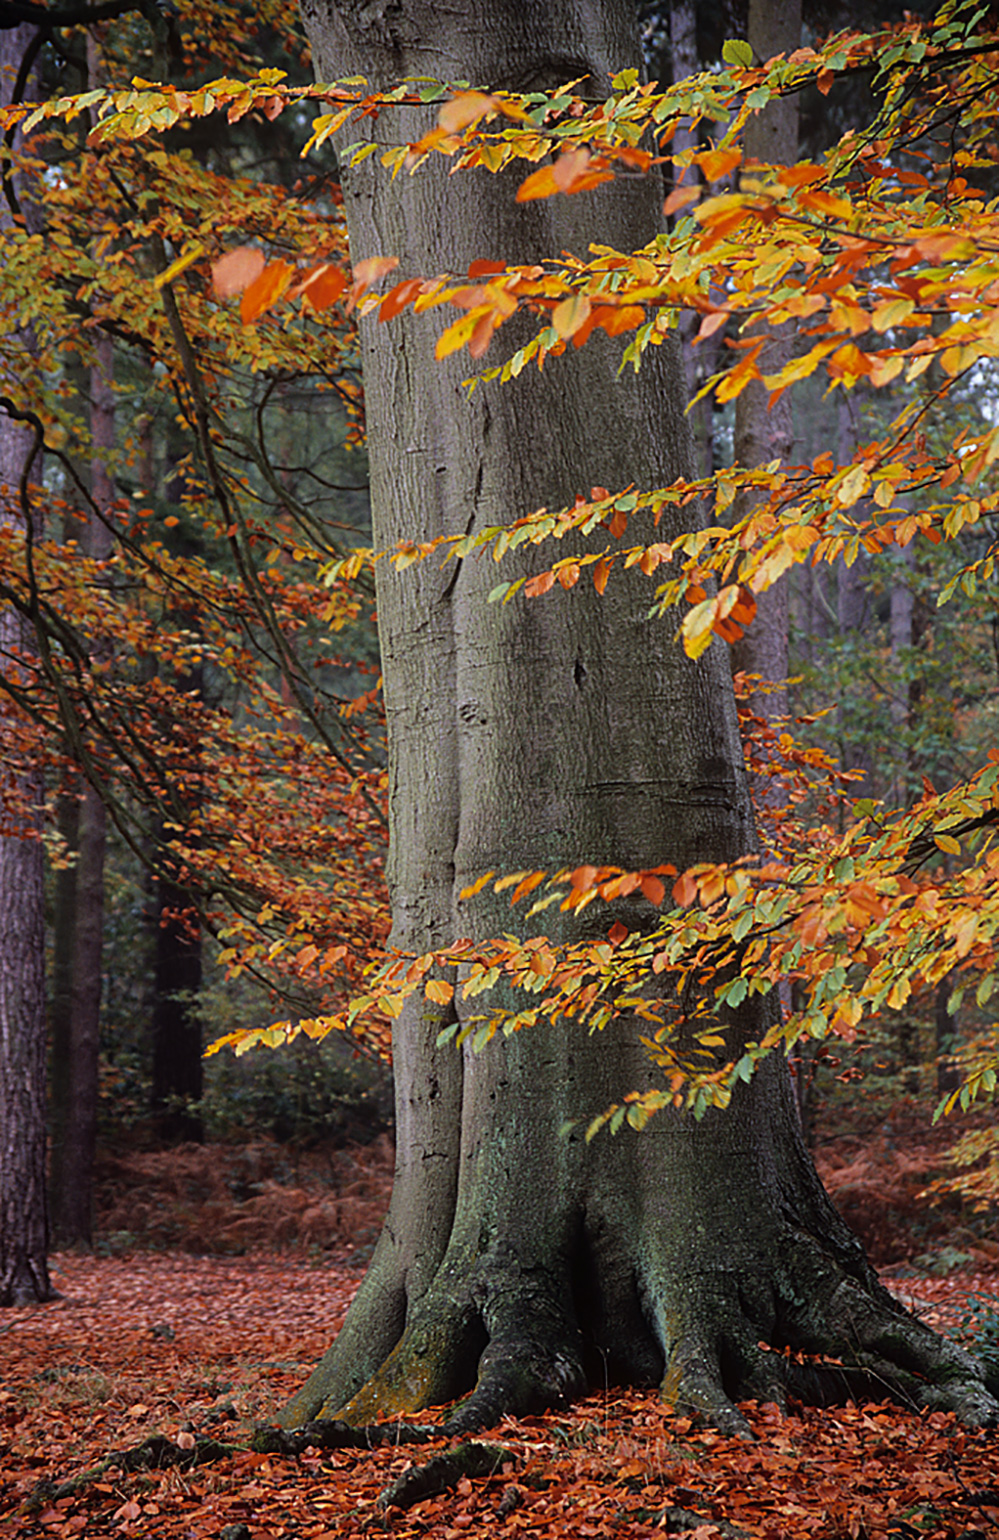 Autumn Beech Tree and Leaves, Virginia Water